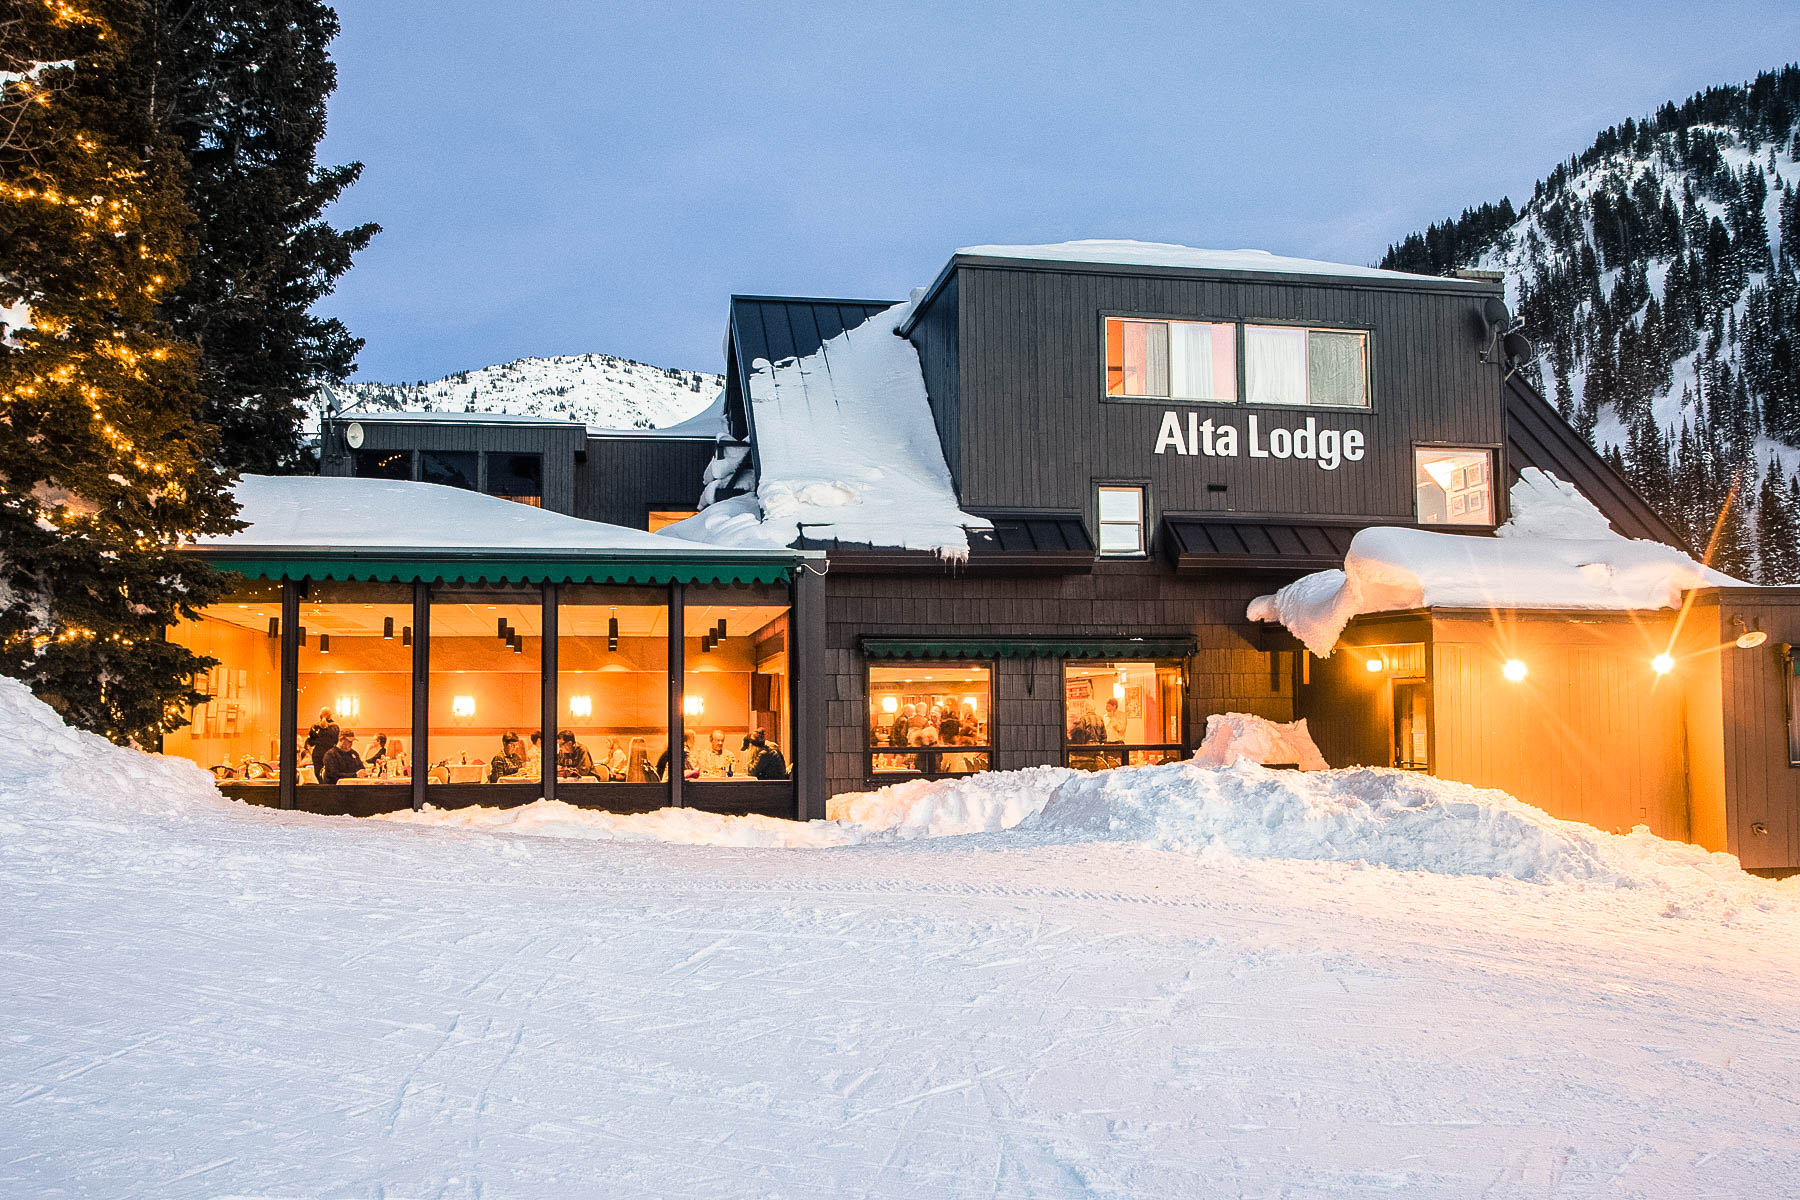 Looking into the bright lights of the Alta Lodge dining room in the evening, from the rope tow hill.